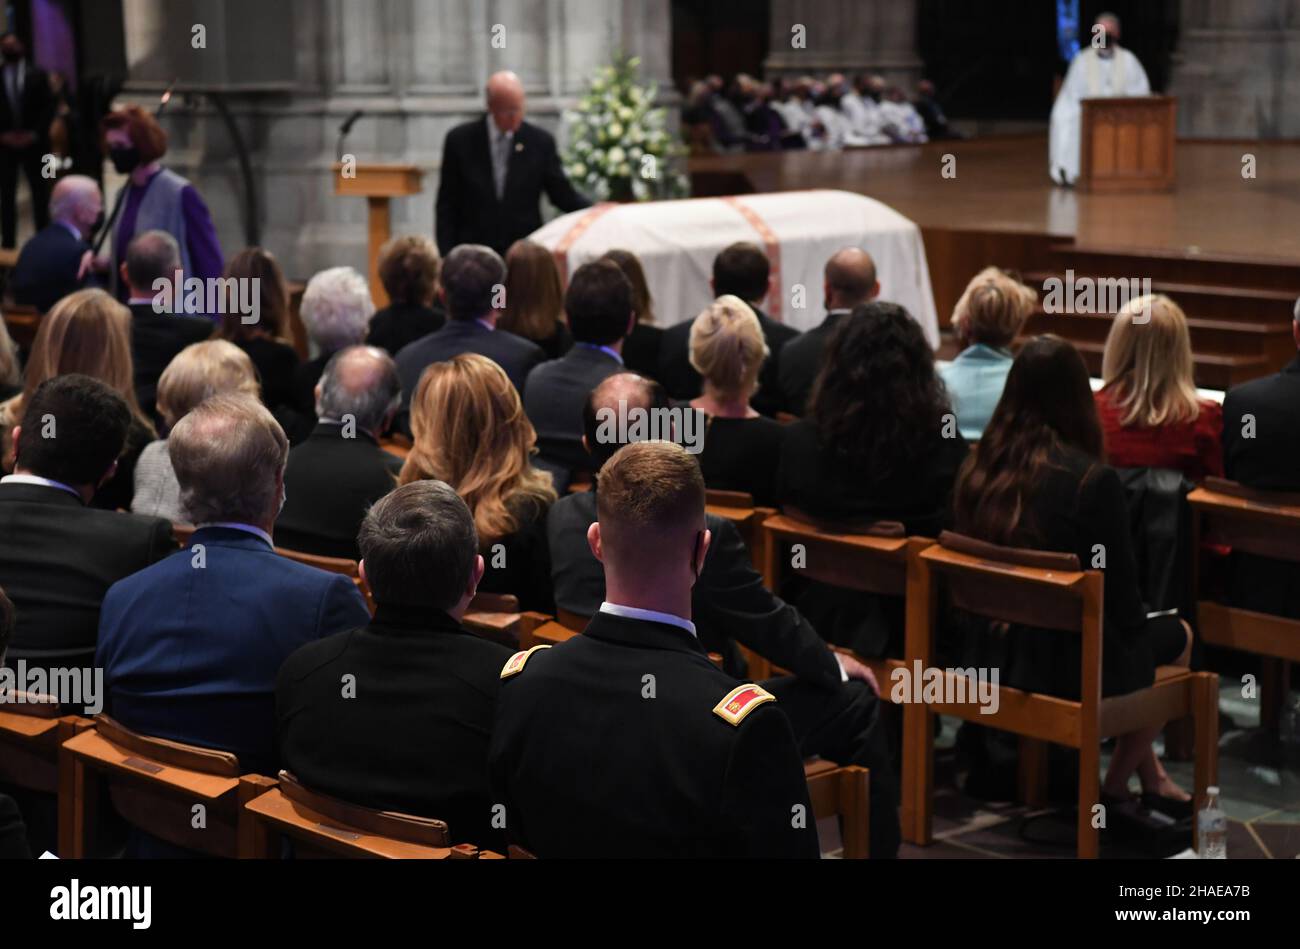 Washington, United States Of America. 10th Dec, 2021. Washington, United States of America. 10 December, 2021. U.S. Senator Patrick Leahy pays respect to World War II veteran and former Senator Robert Dole during funeral services at Washington National Cathedral, December 10, 2021 in Washington, DC Senator Dole died at age 98 following a lifetime of service to the nation. Credit: Joseph Lawson/U.S. Army/Alamy Live News Stock Photo